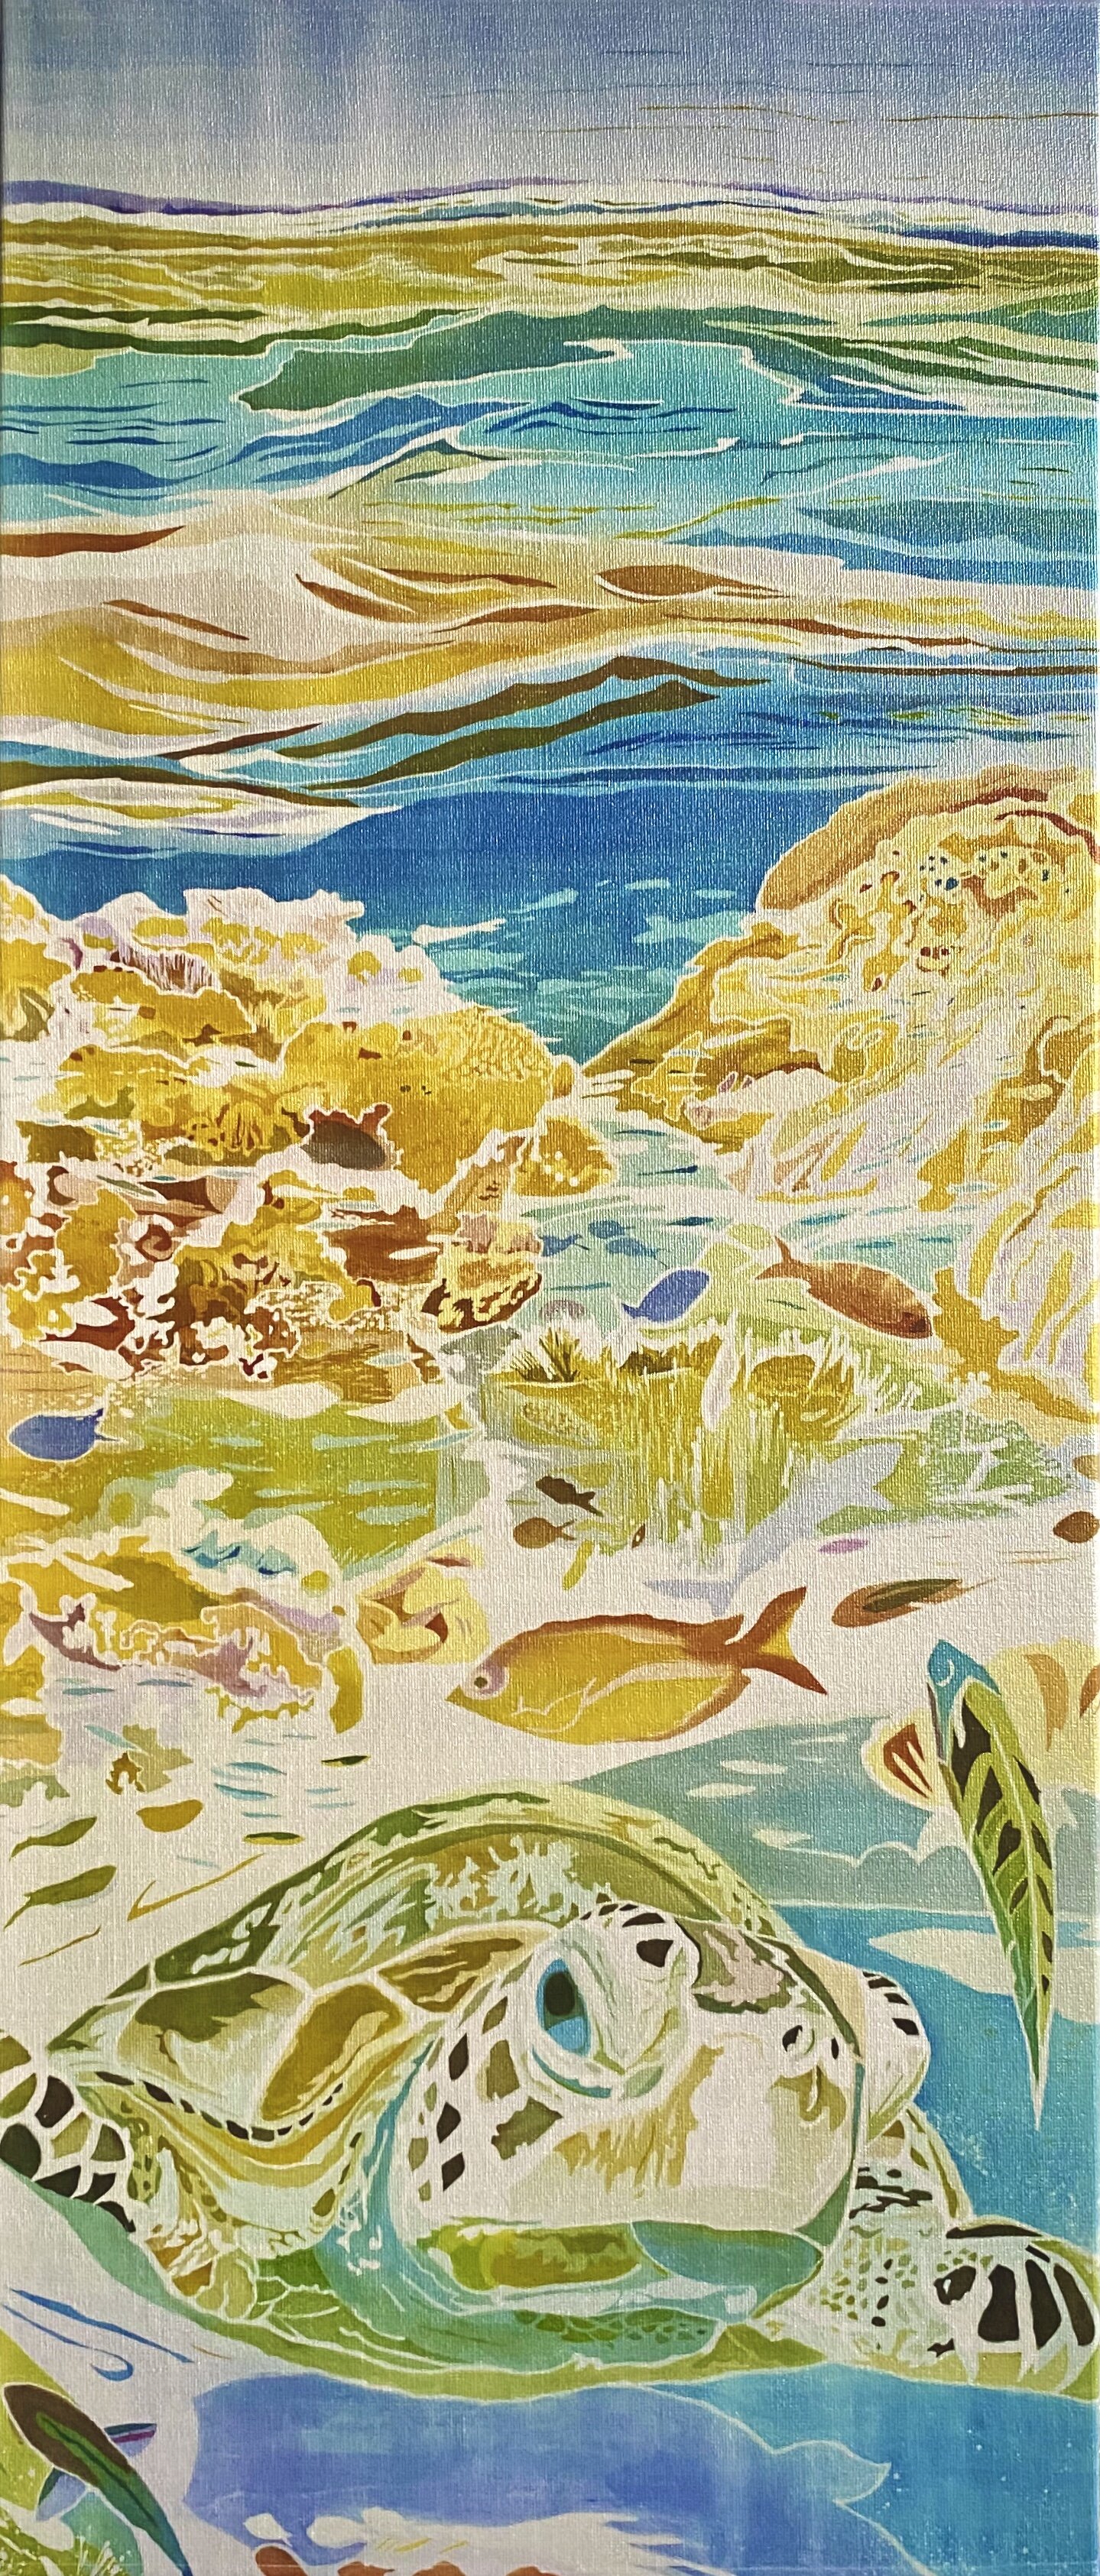 "Great Barrier Reef" by Mary Edna Fraser